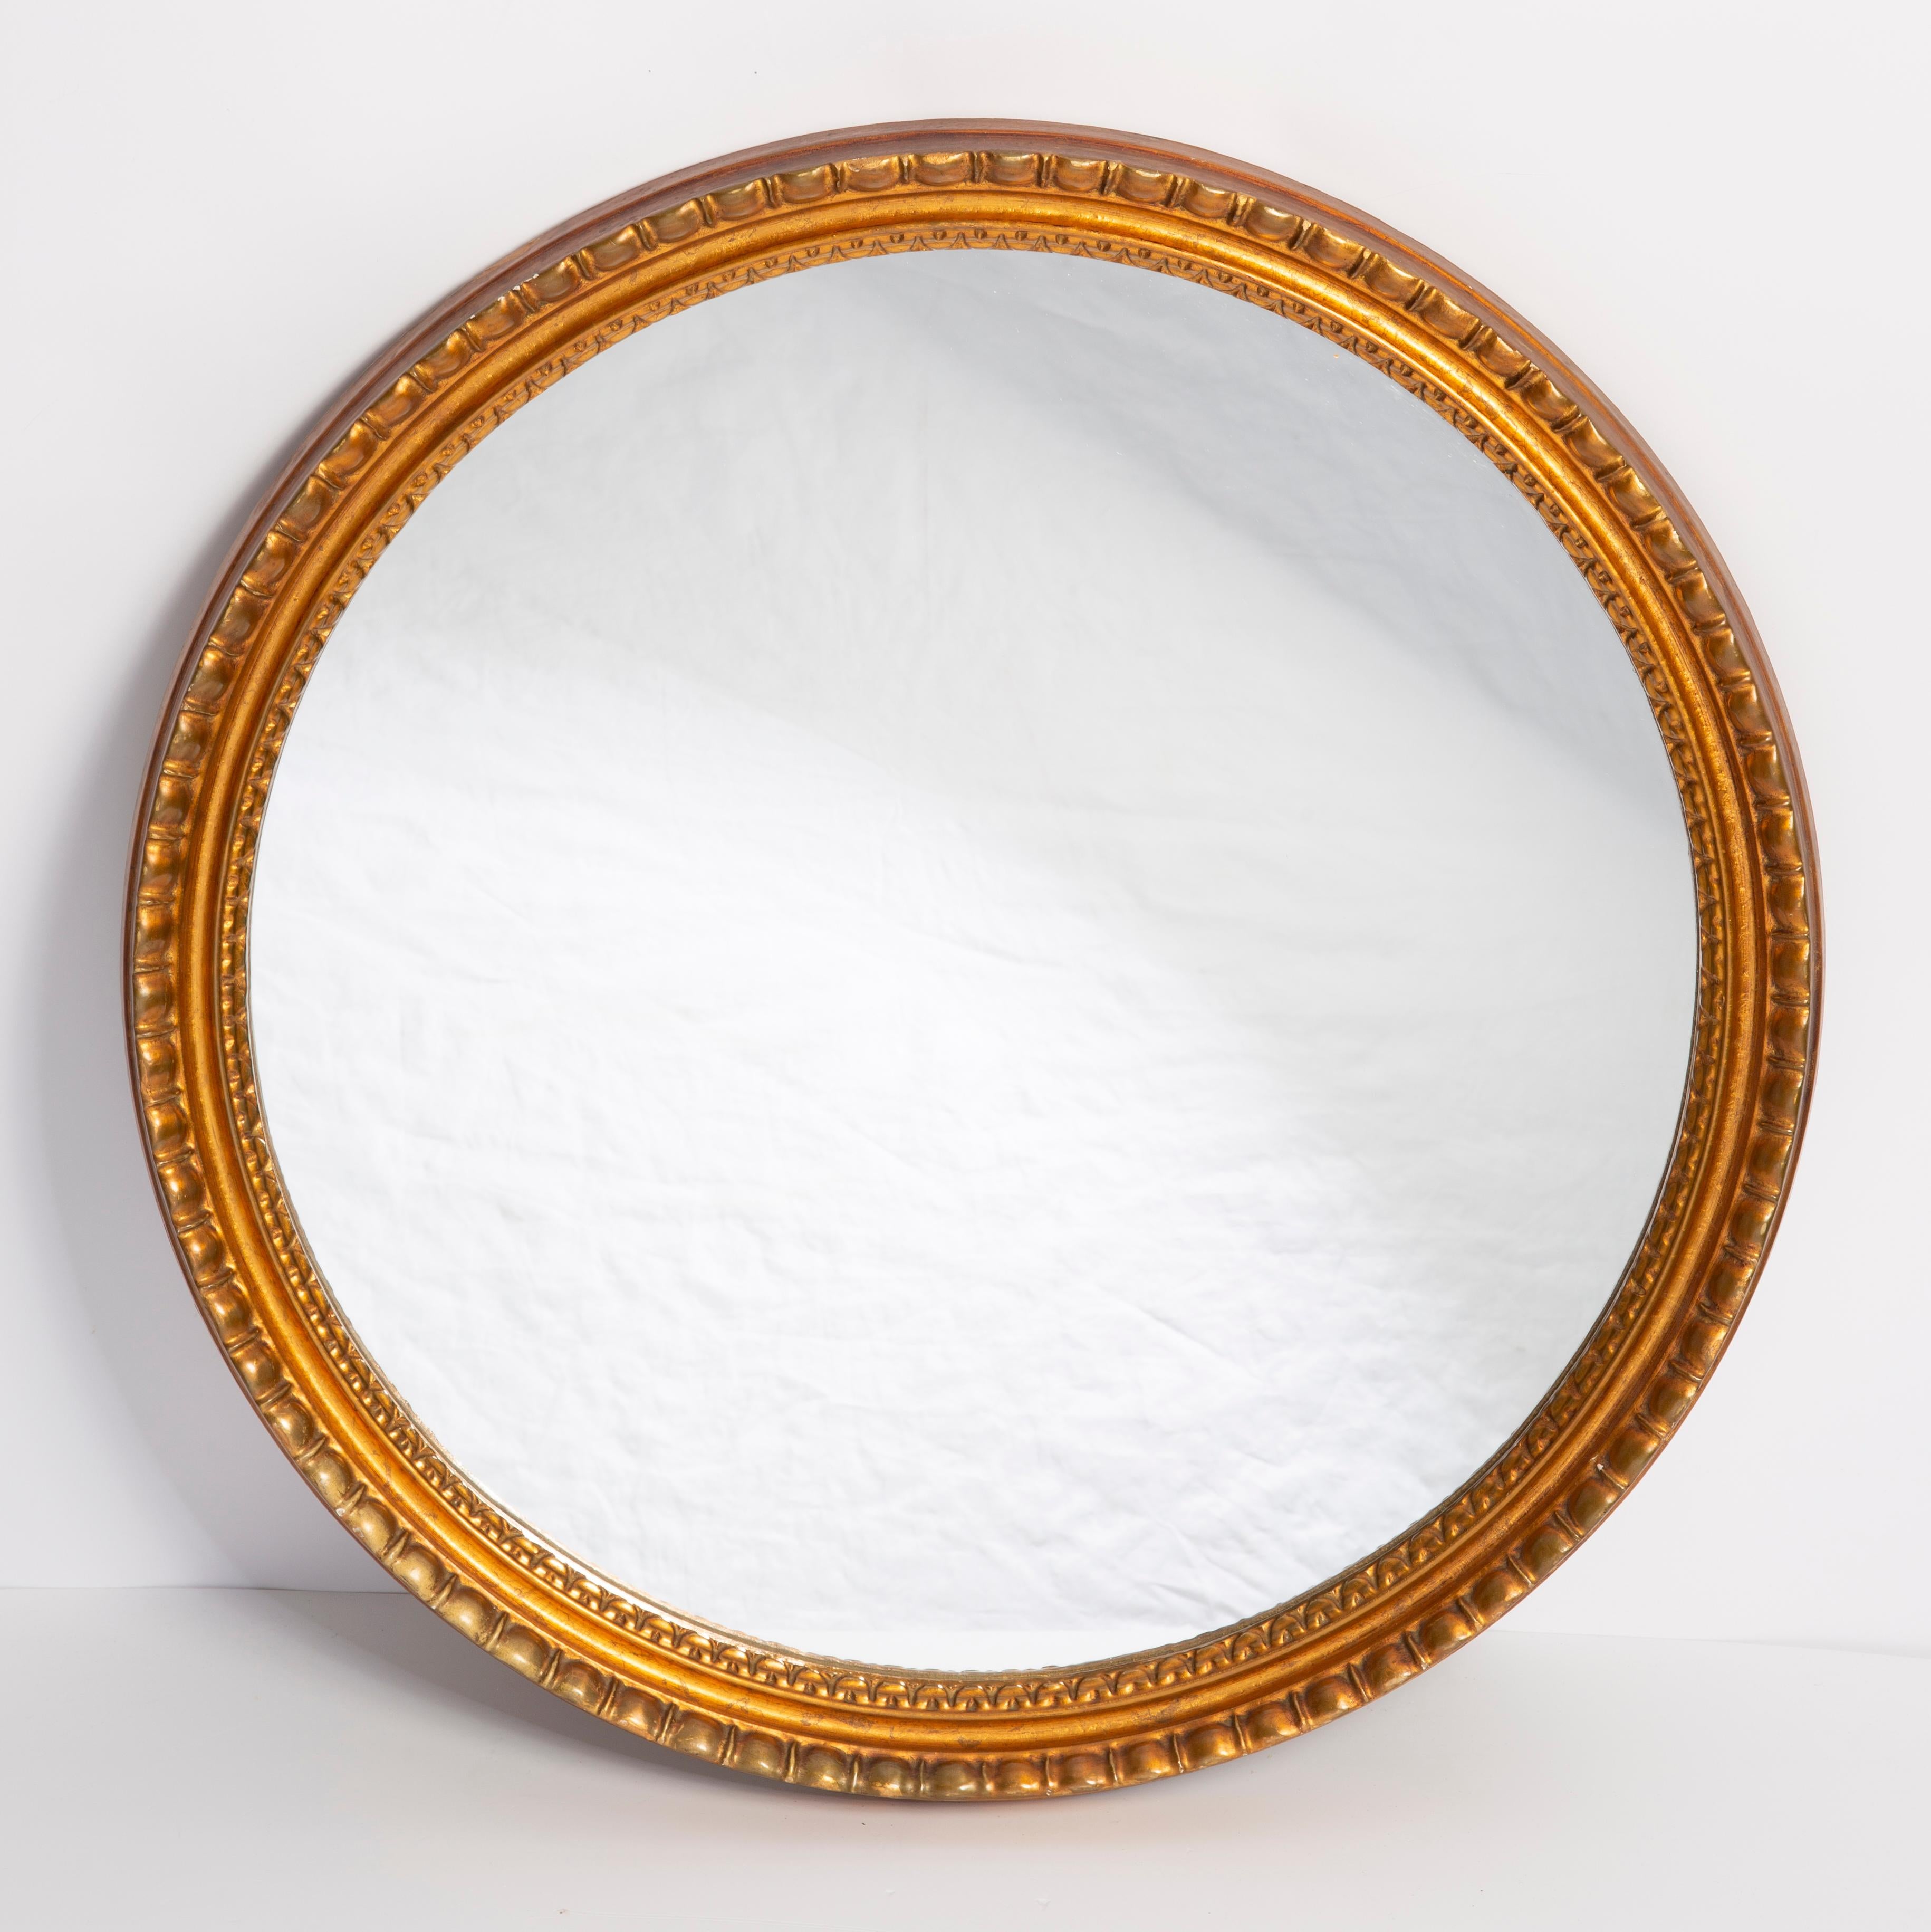 Italian Vintage Oval Gold and Black Decorative Mirror in Flowers Frame, Italy, 1960s For Sale